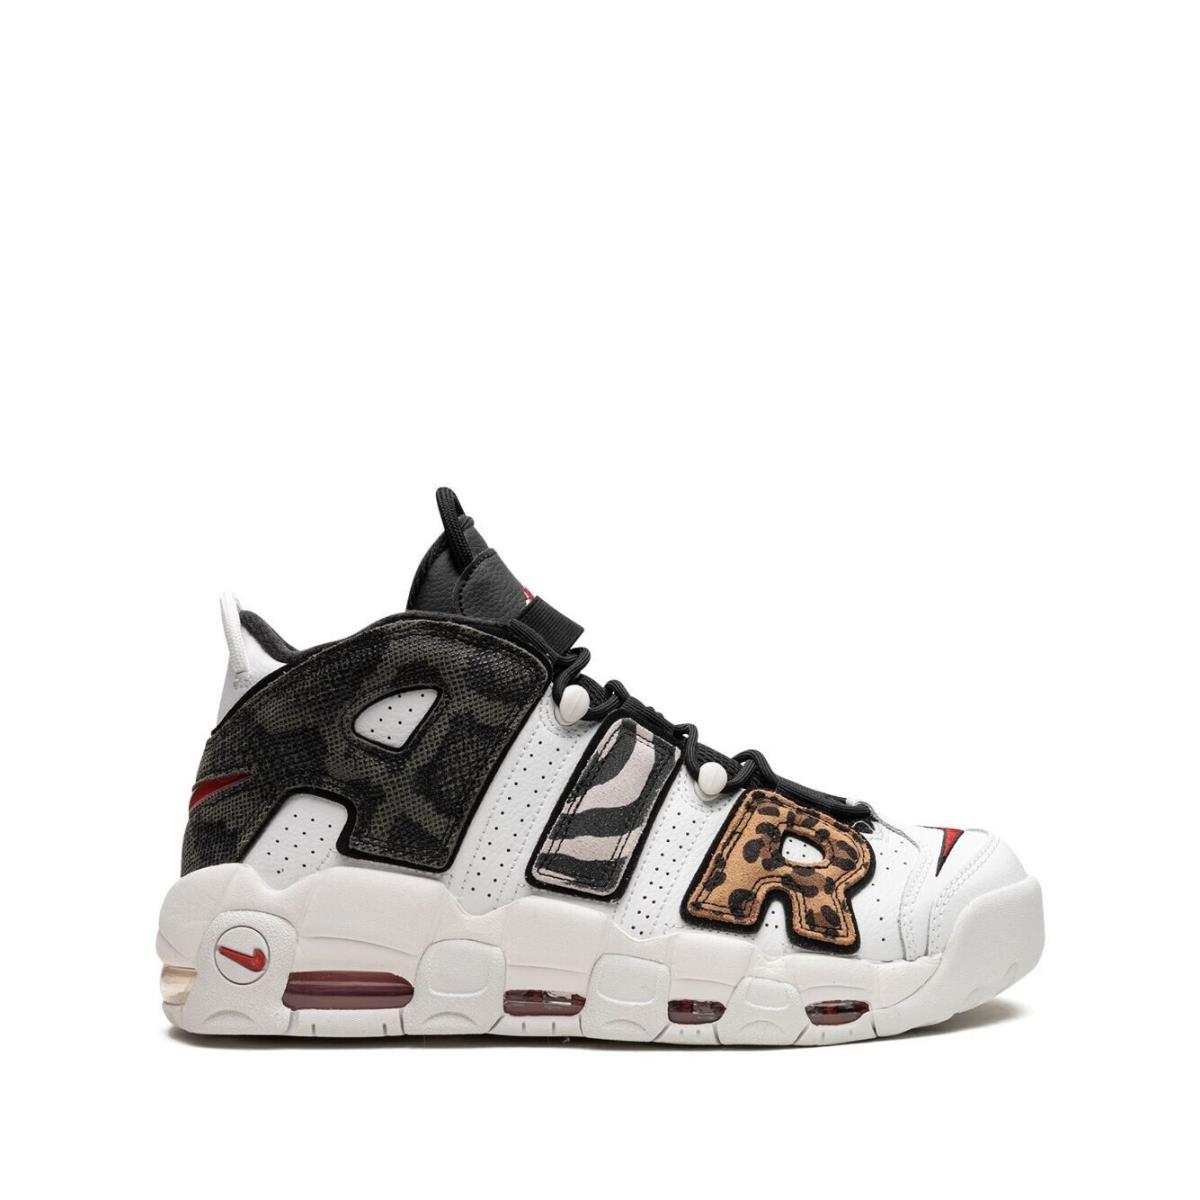 Nike Air More Uptempo Animal Print Youth Size 5.5 TO 6.5 Summit White - Summit White, University Red